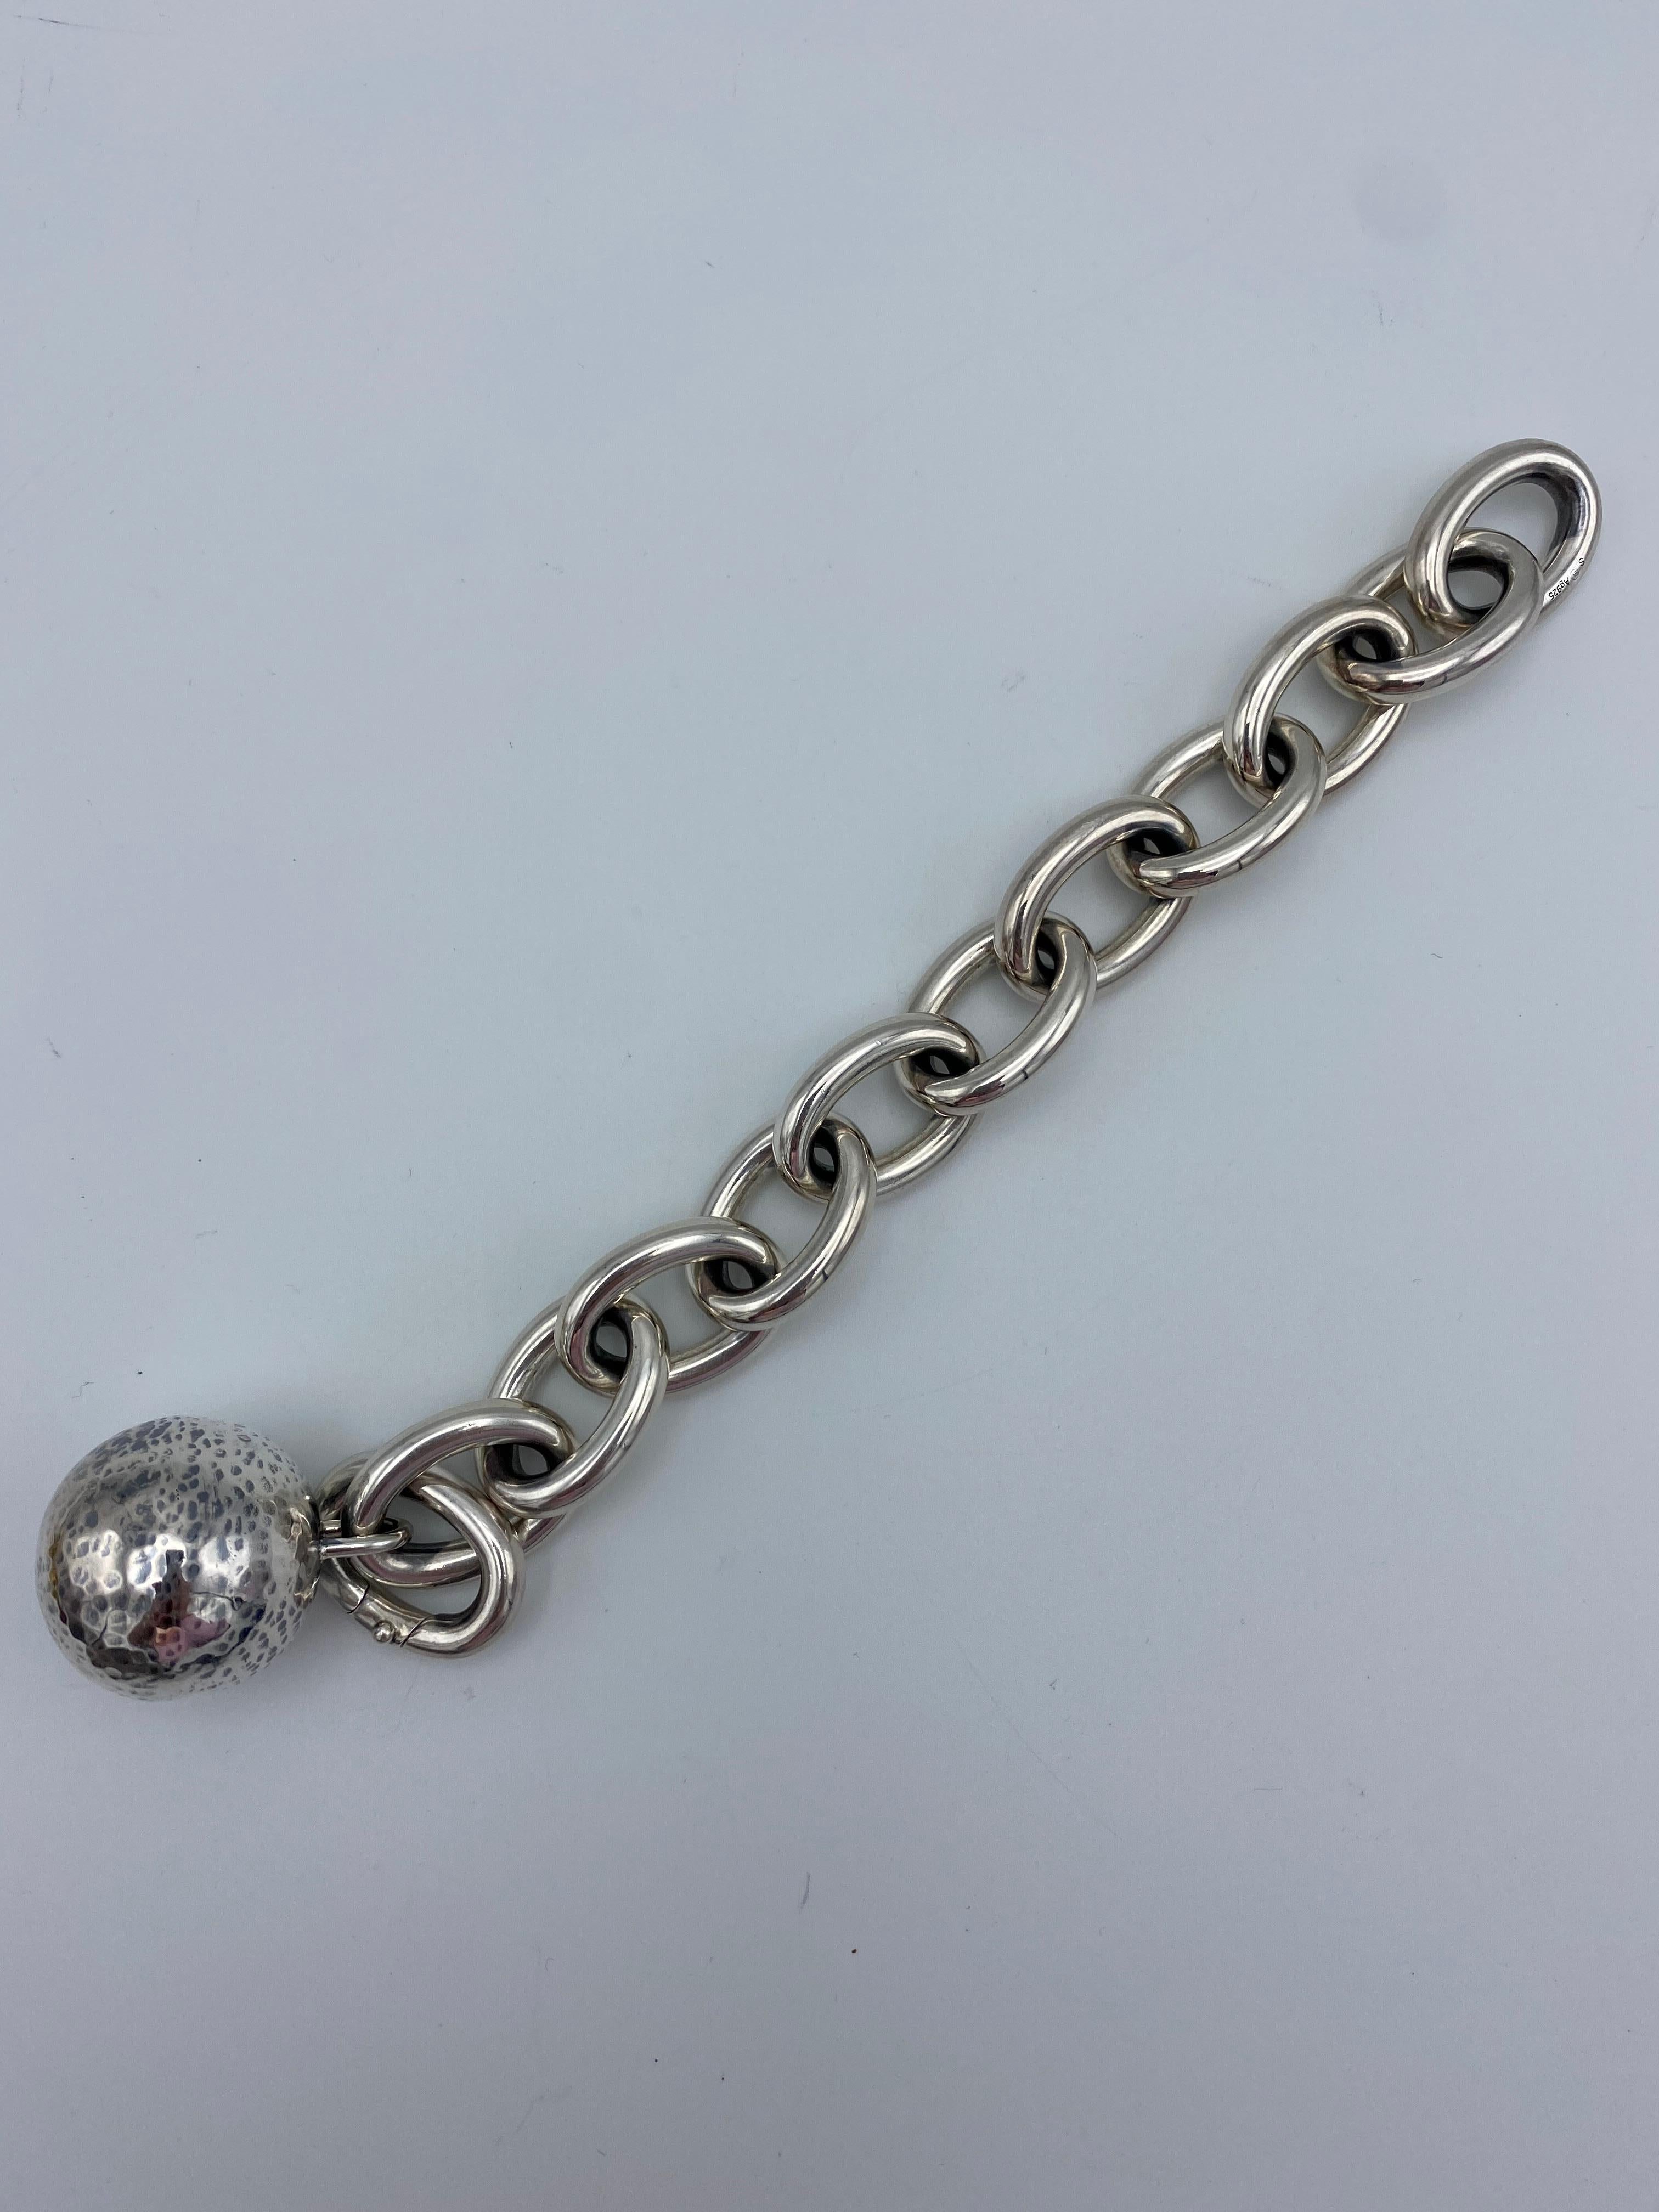 Product details:

The bracelet is designed by Bottega Veneta, it is made out of sterling silver, featuring chunky oval chain link with hammered finish ball attached and a discreet clip clasp.

Measurements: the bracelet is 8.75